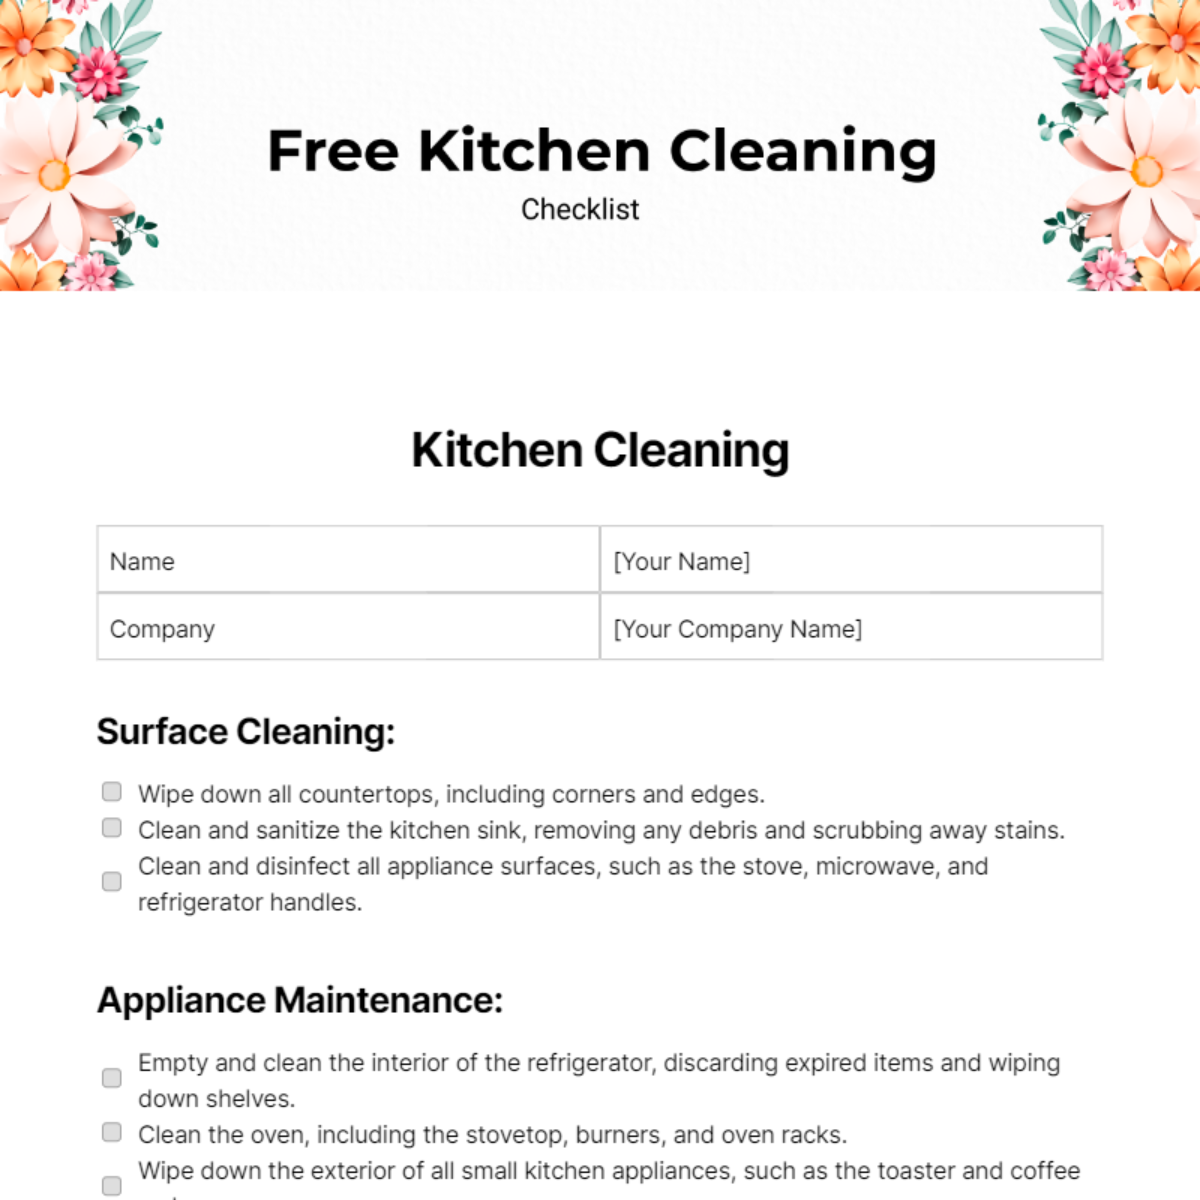 Free Kitchen Cleaning Checklist Template